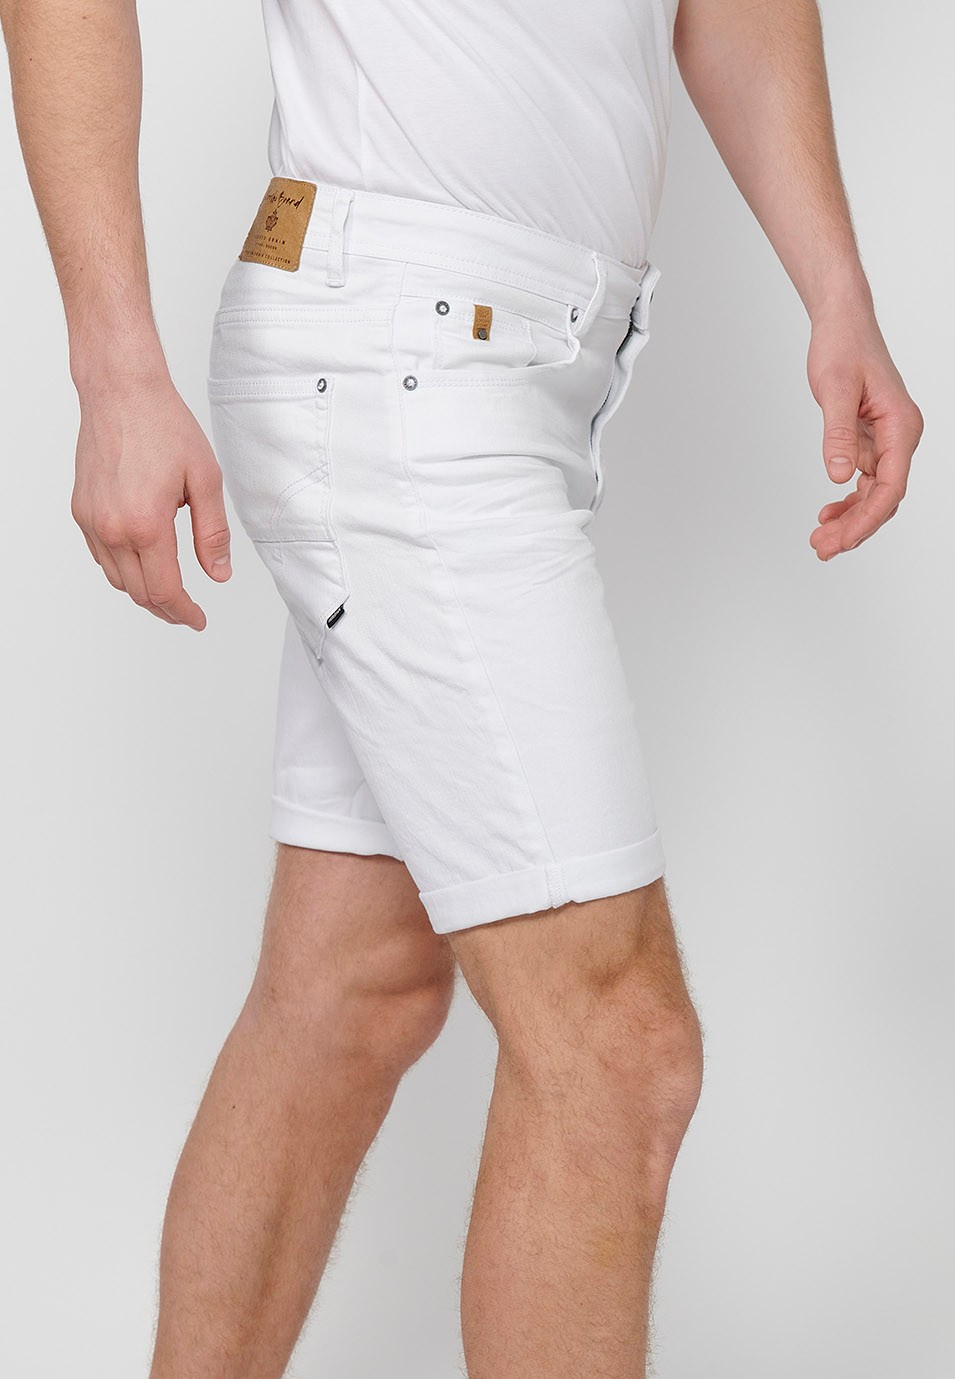 Denim Bermuda shorts with cuffed finish and front zipper and button closure. Five pockets, one match pocket, White for Men 3